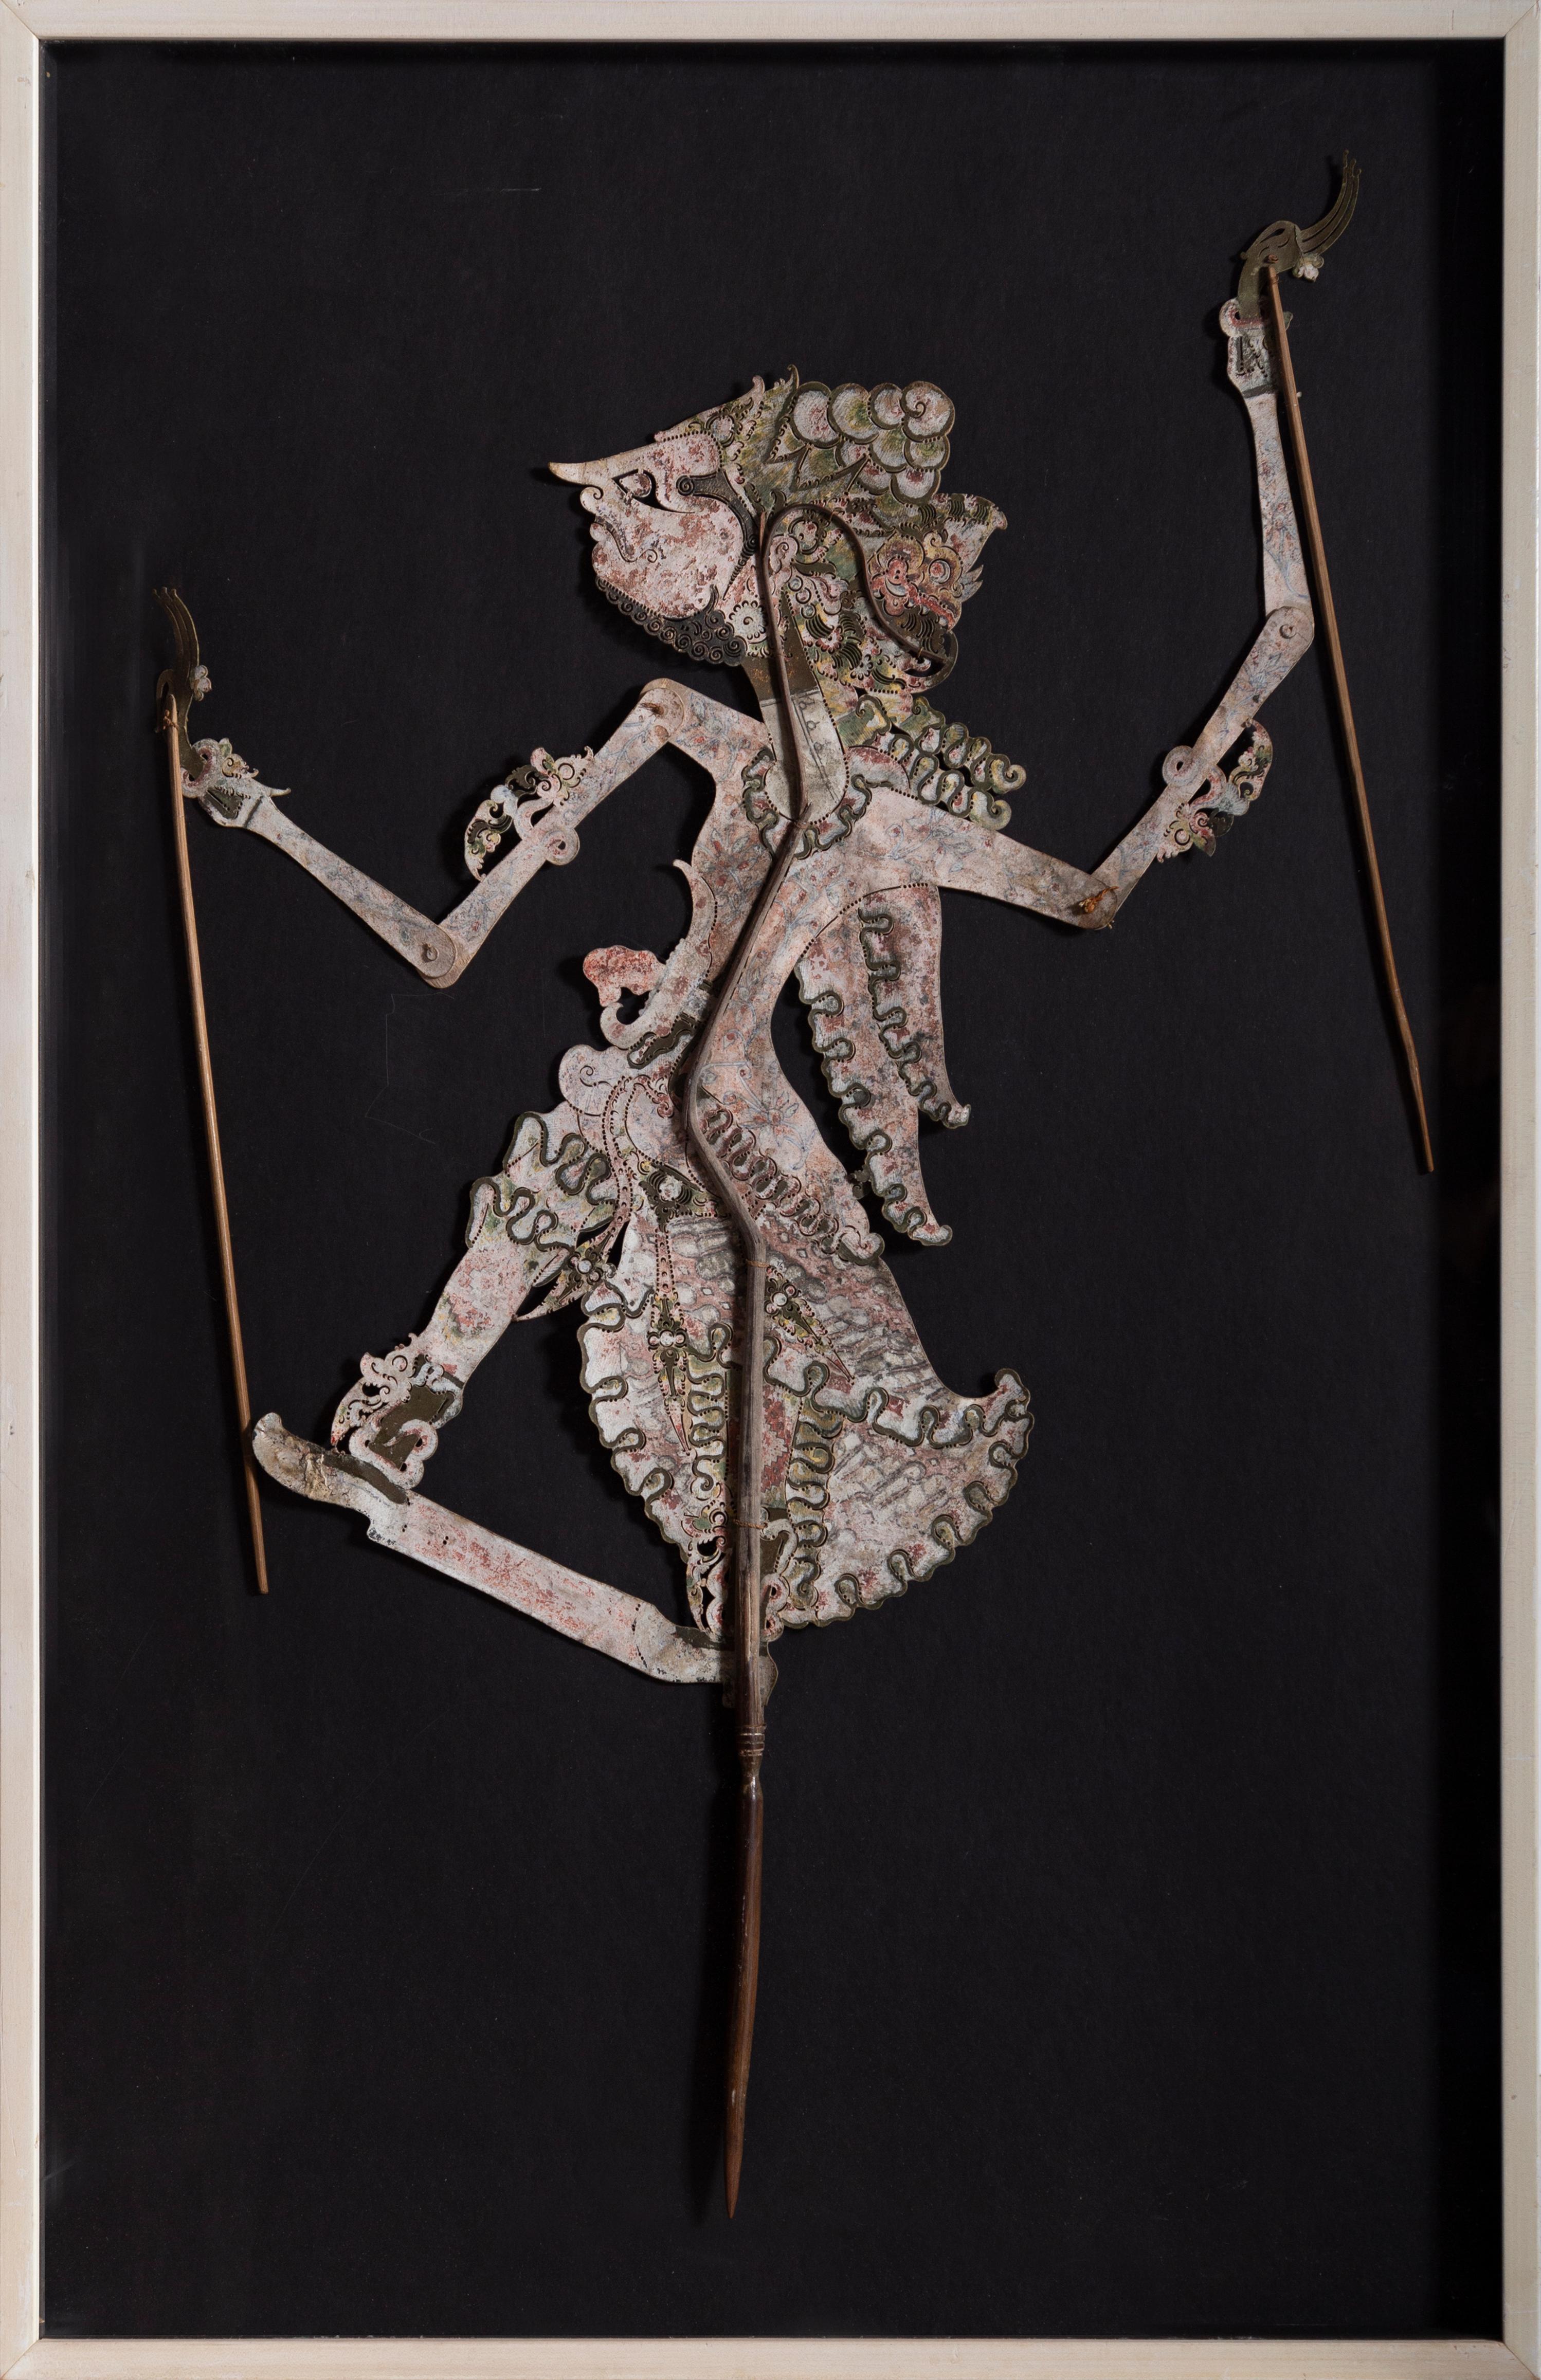 Thai Shadow Puppet - Mixed Media Art by Unknown